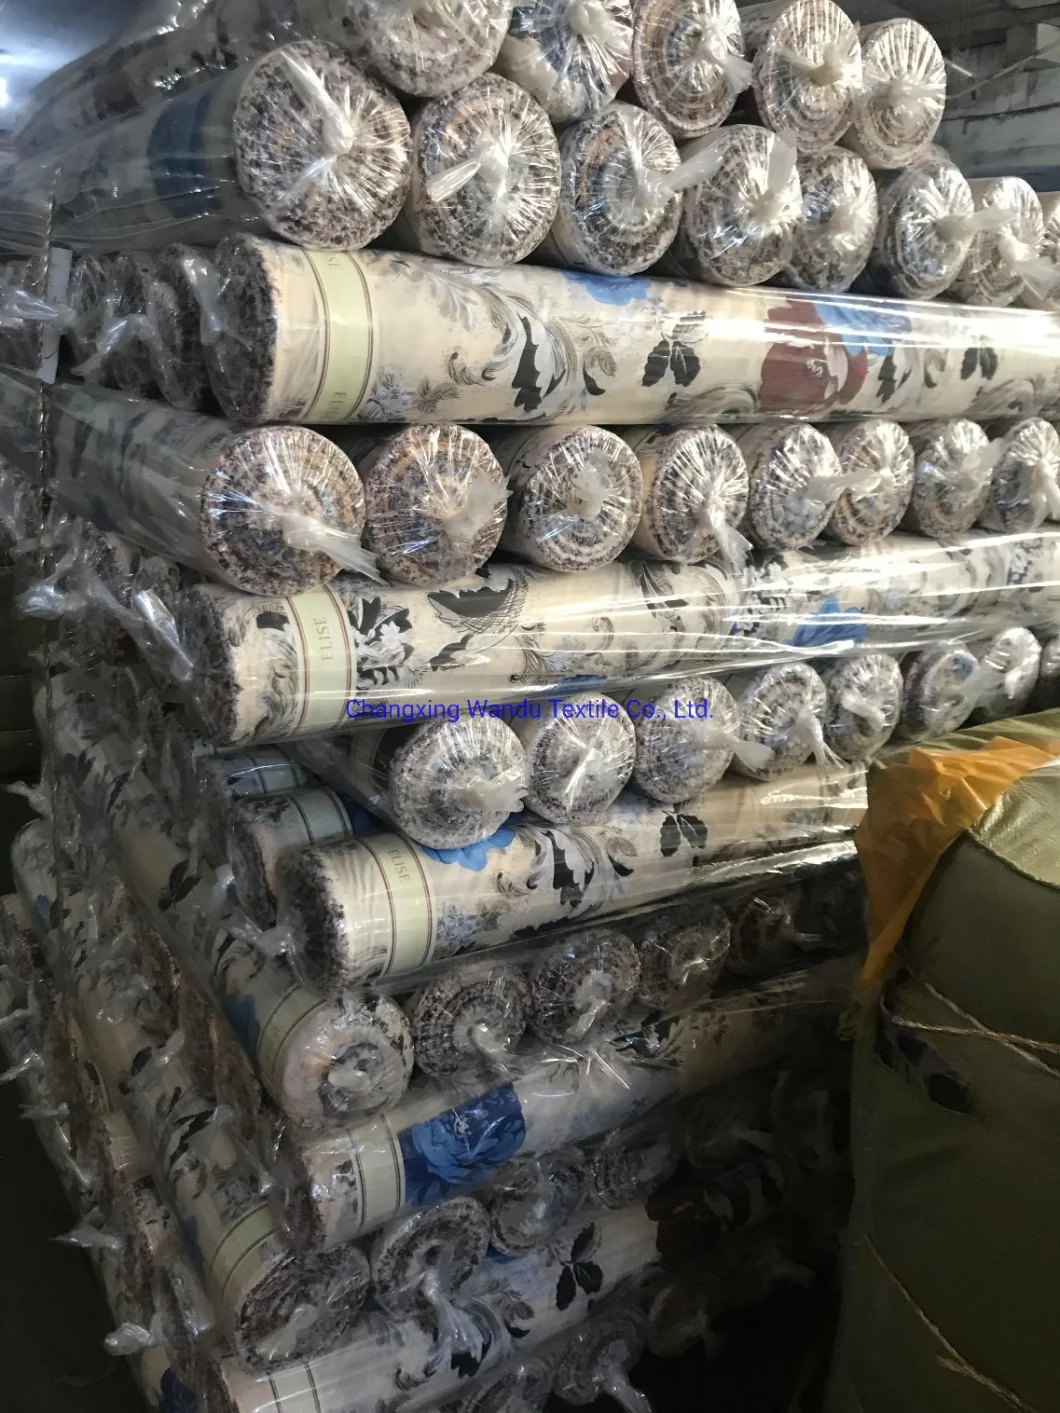 Cartoon Printing All Polyester Fabric Printing Cloth, Good Quality. The Latest Export Orders to Africa, Textile China, Changxing Wandu Textile